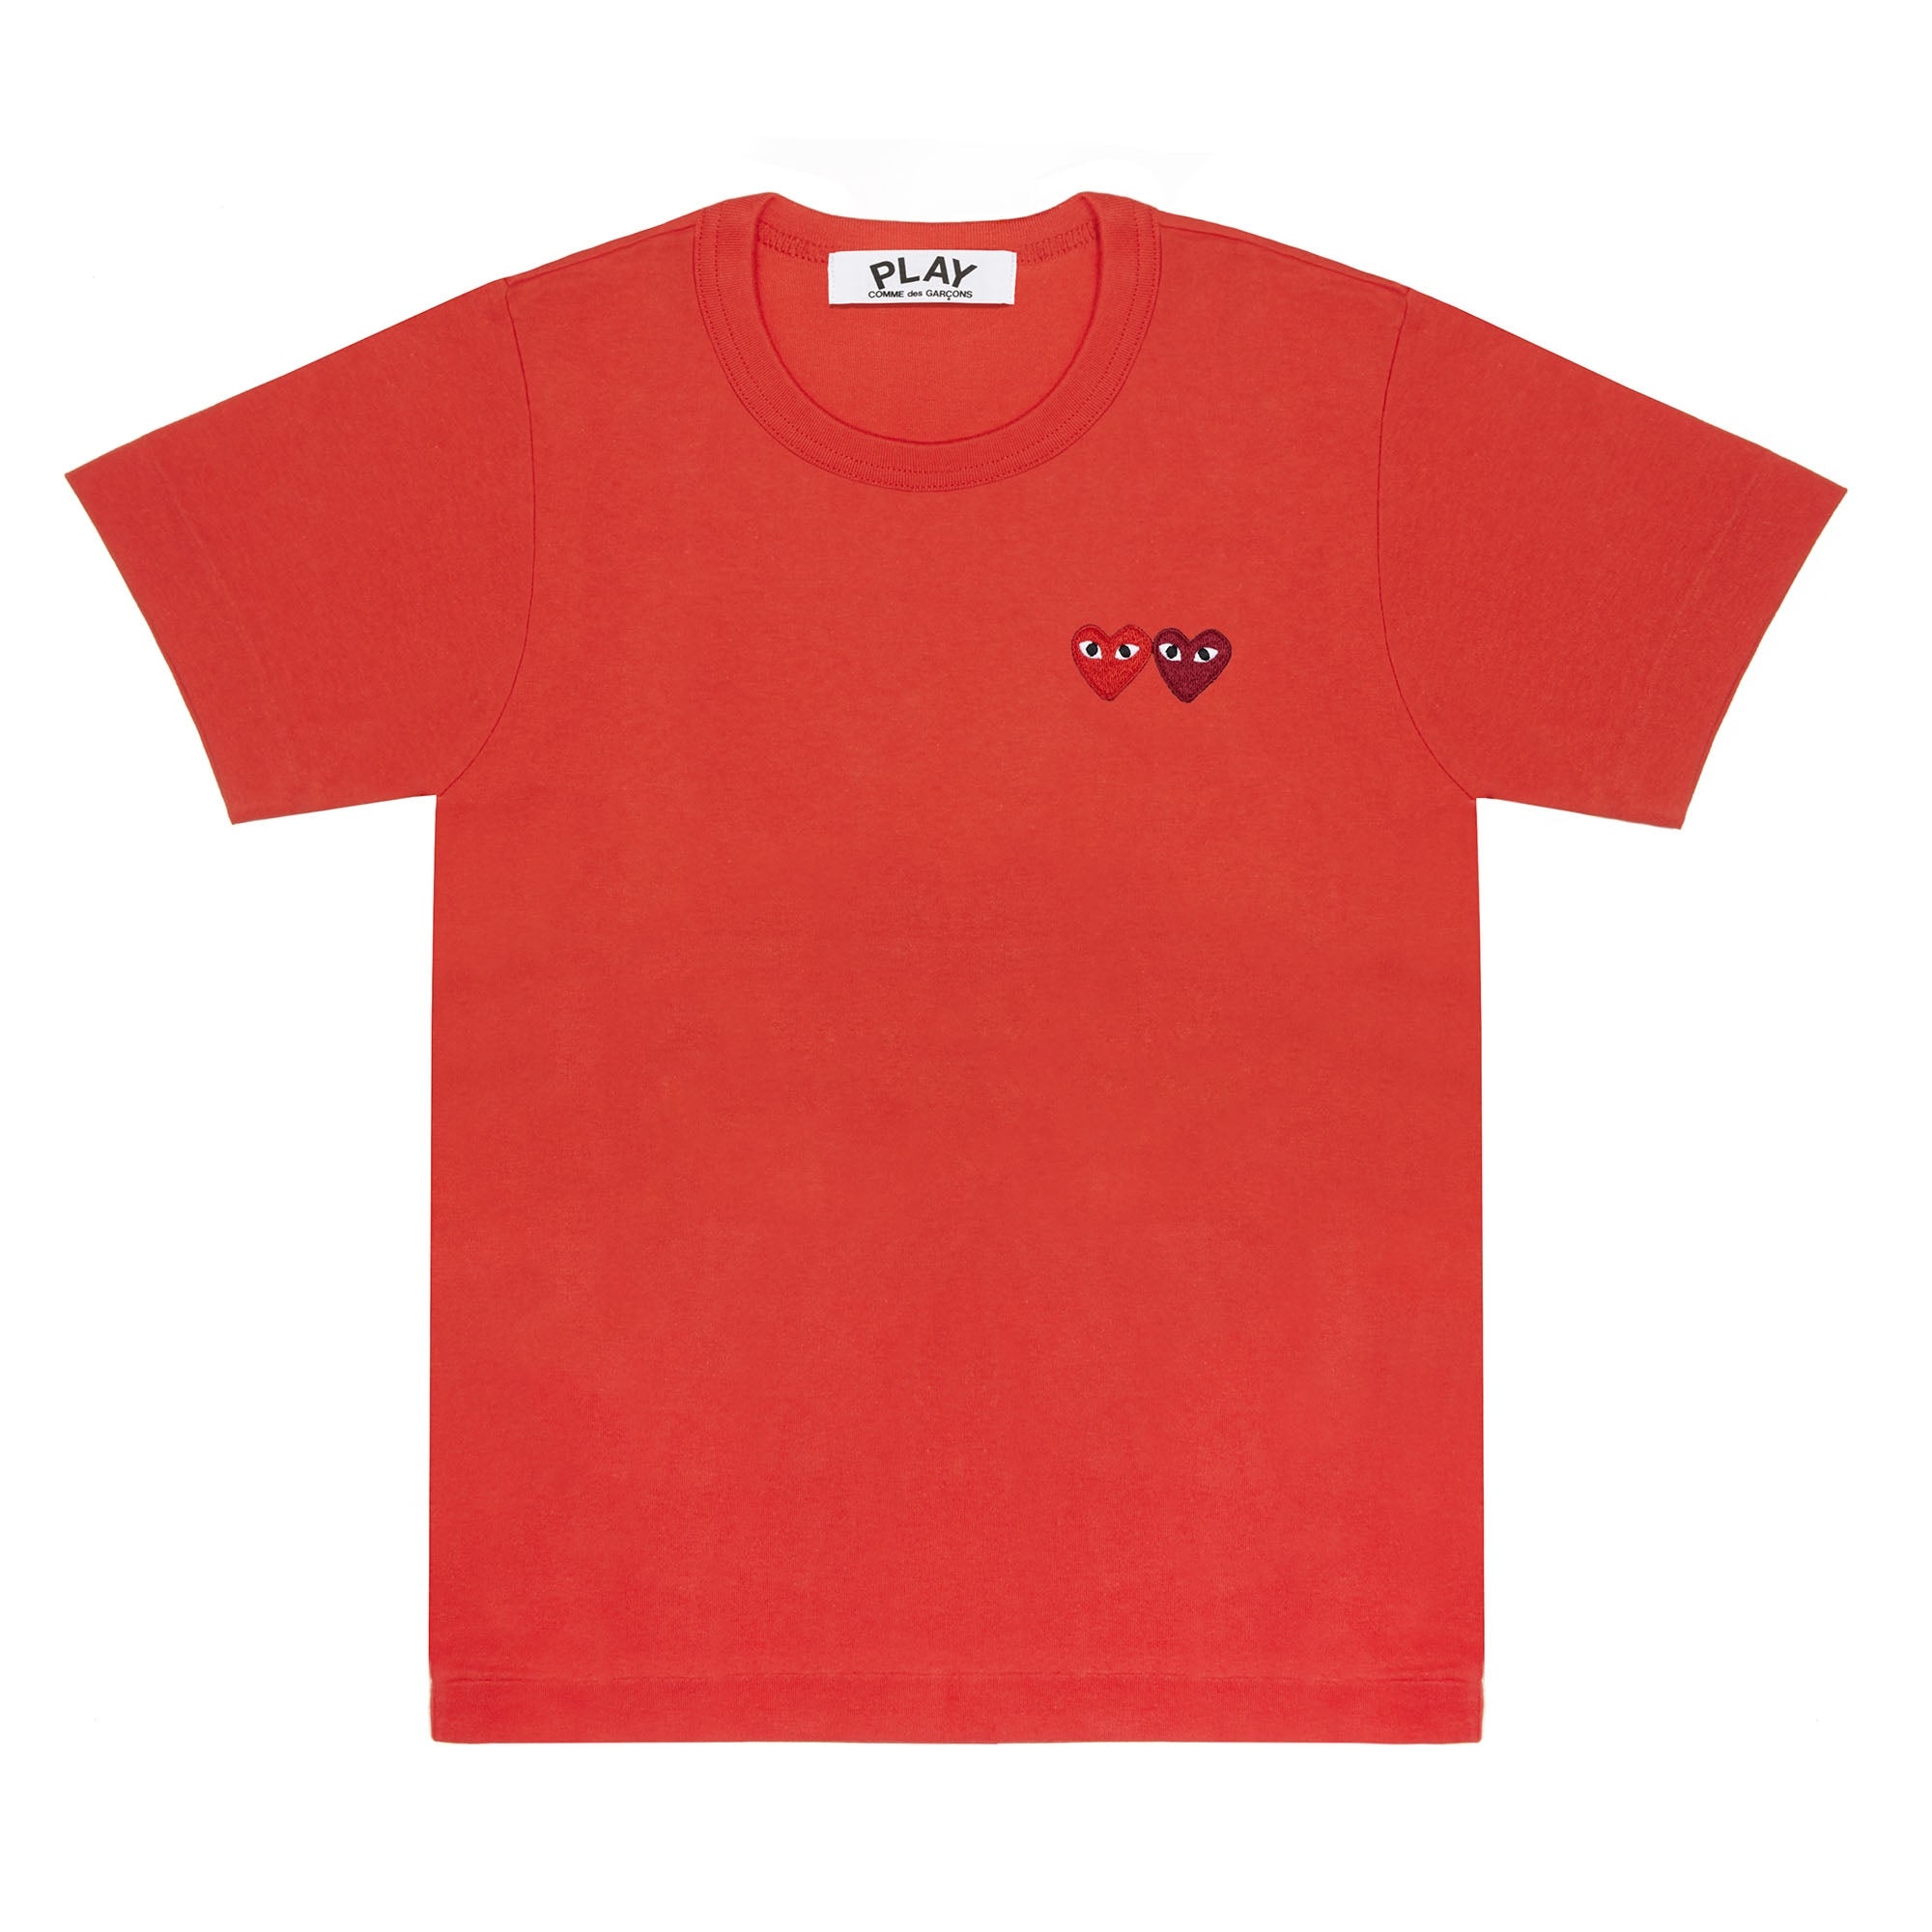 PLAY CDG - T-Shirt With Double Heart - (Red) view 1